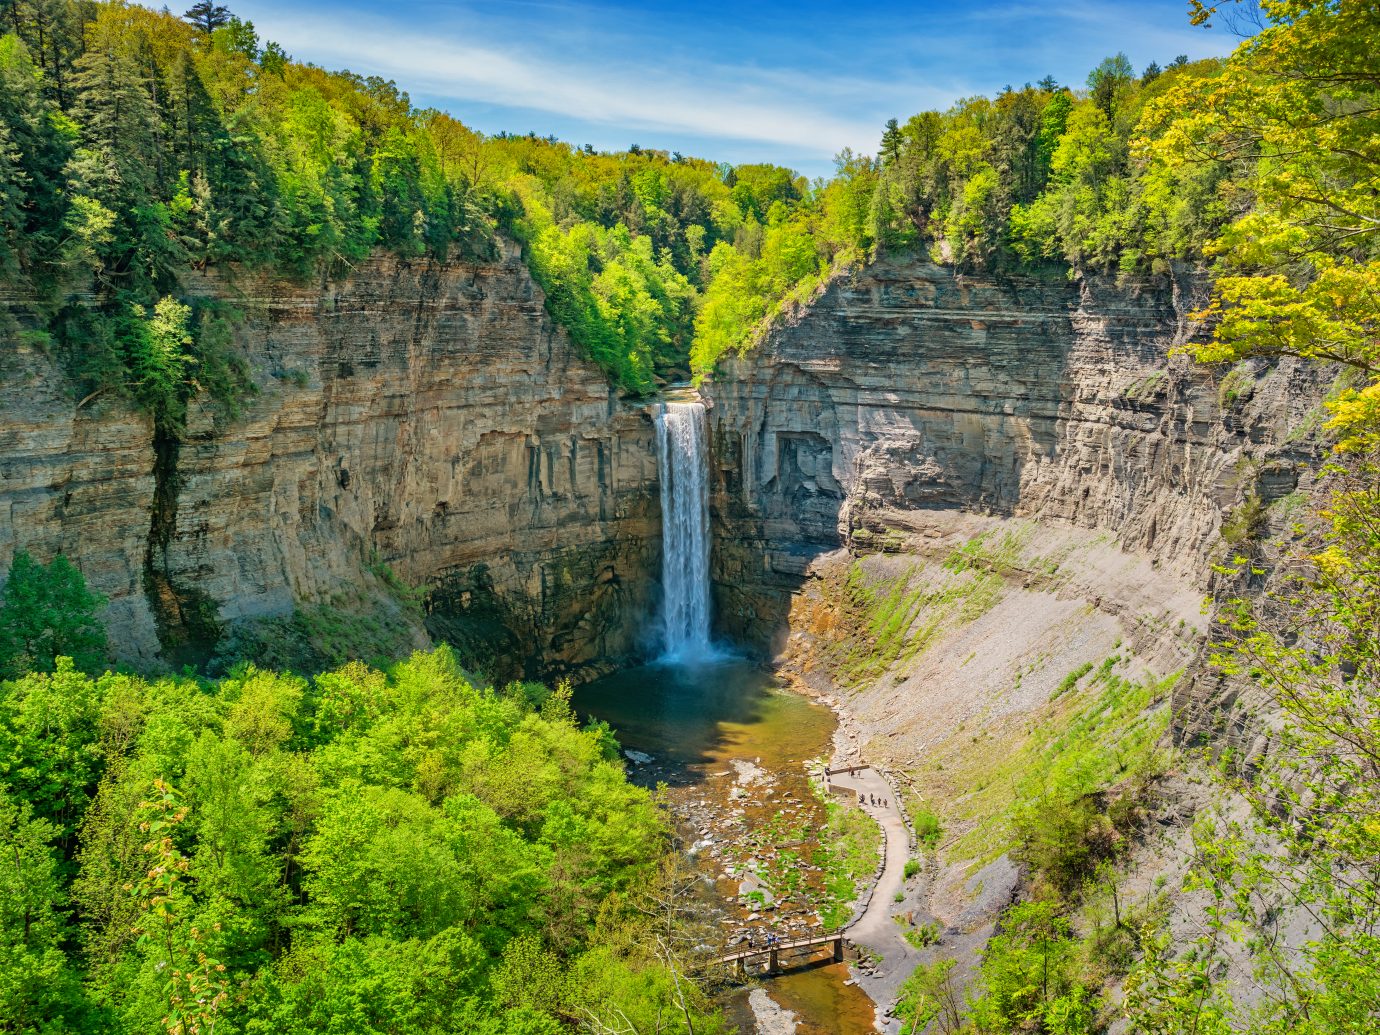 Taughannock Falls State Park near Ithaca New York, USA on a sunny day.